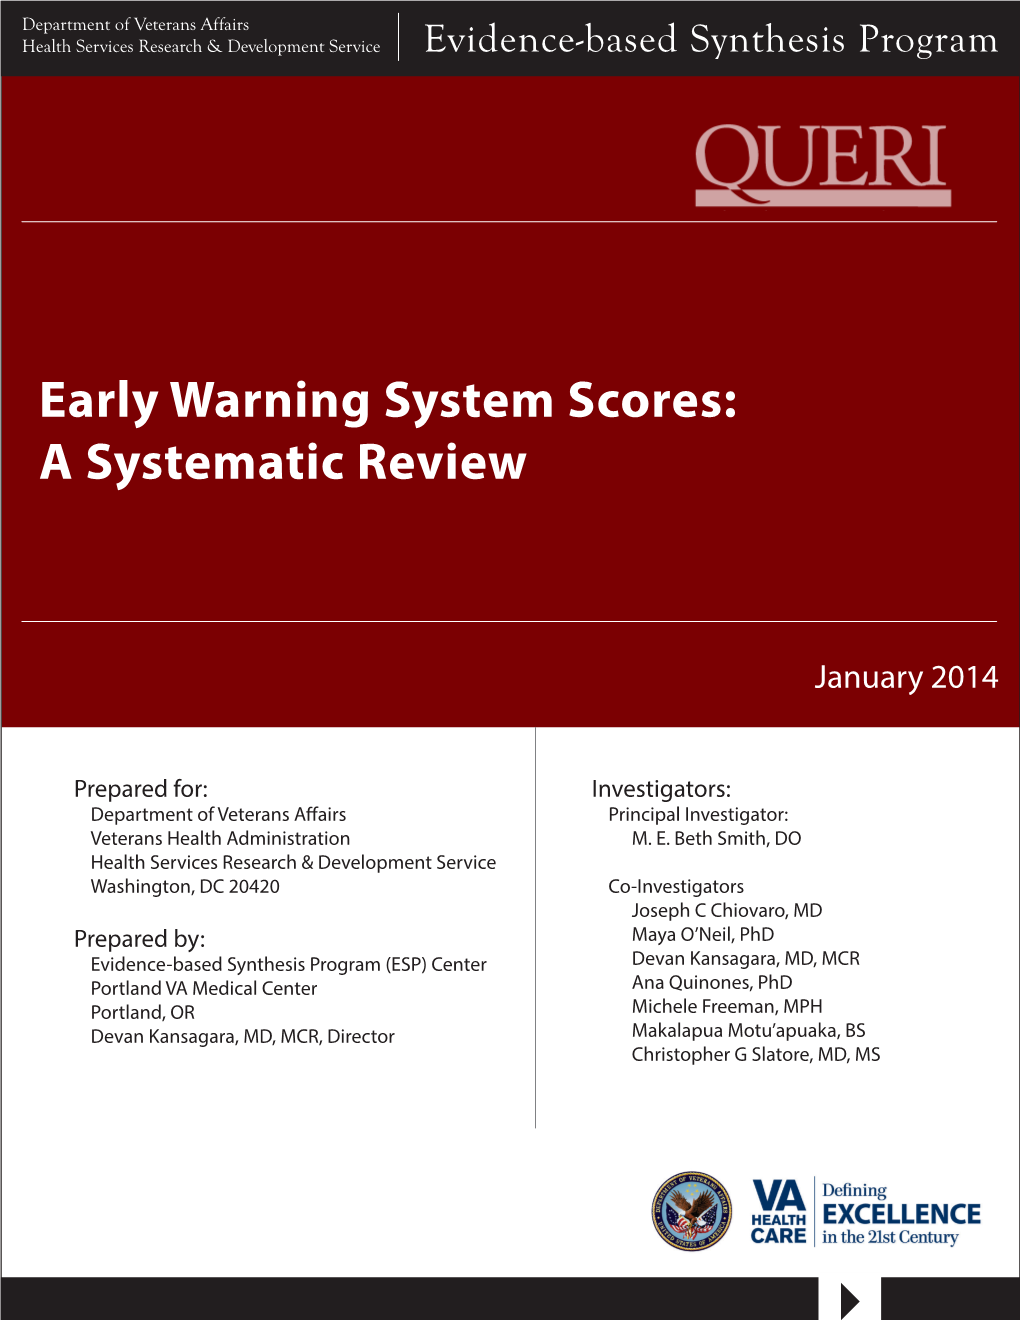 Early Warning System Scores: a Systematic Review